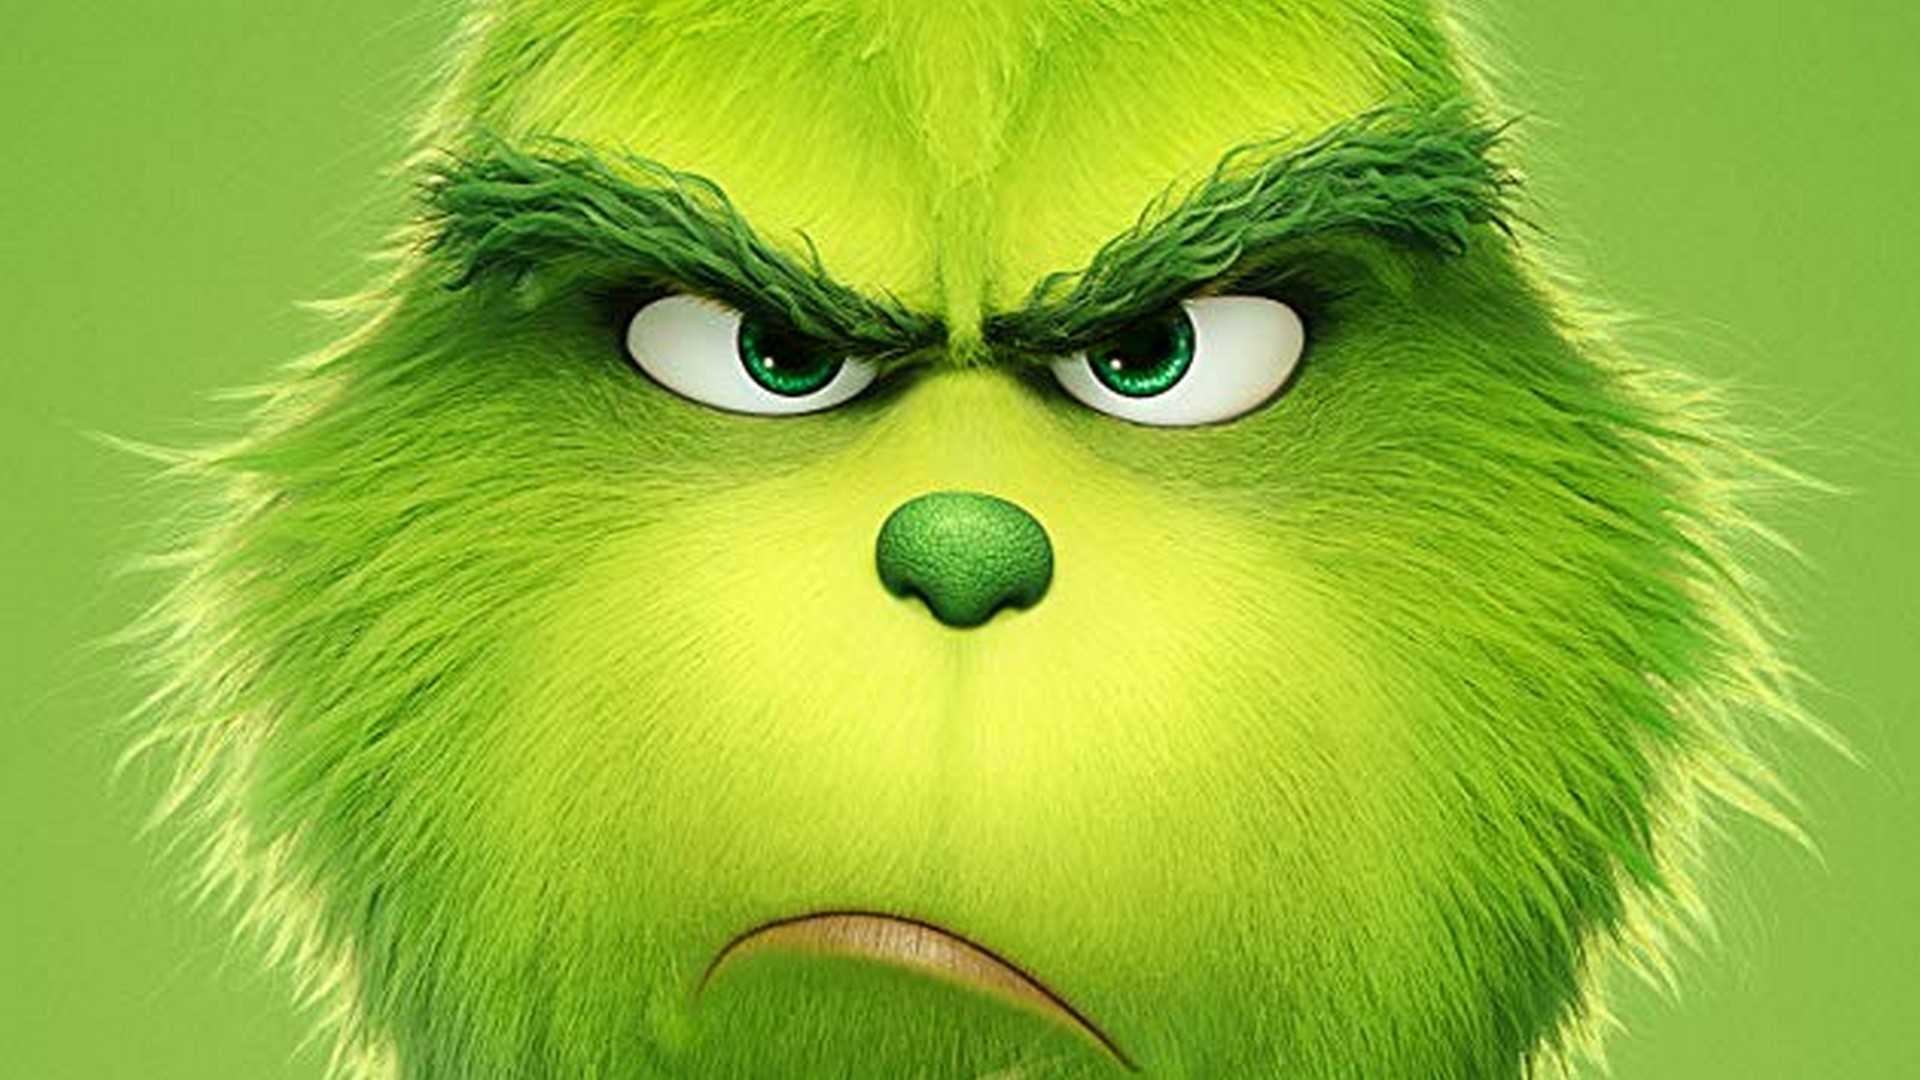 The Grinch Wallpaper HD Live